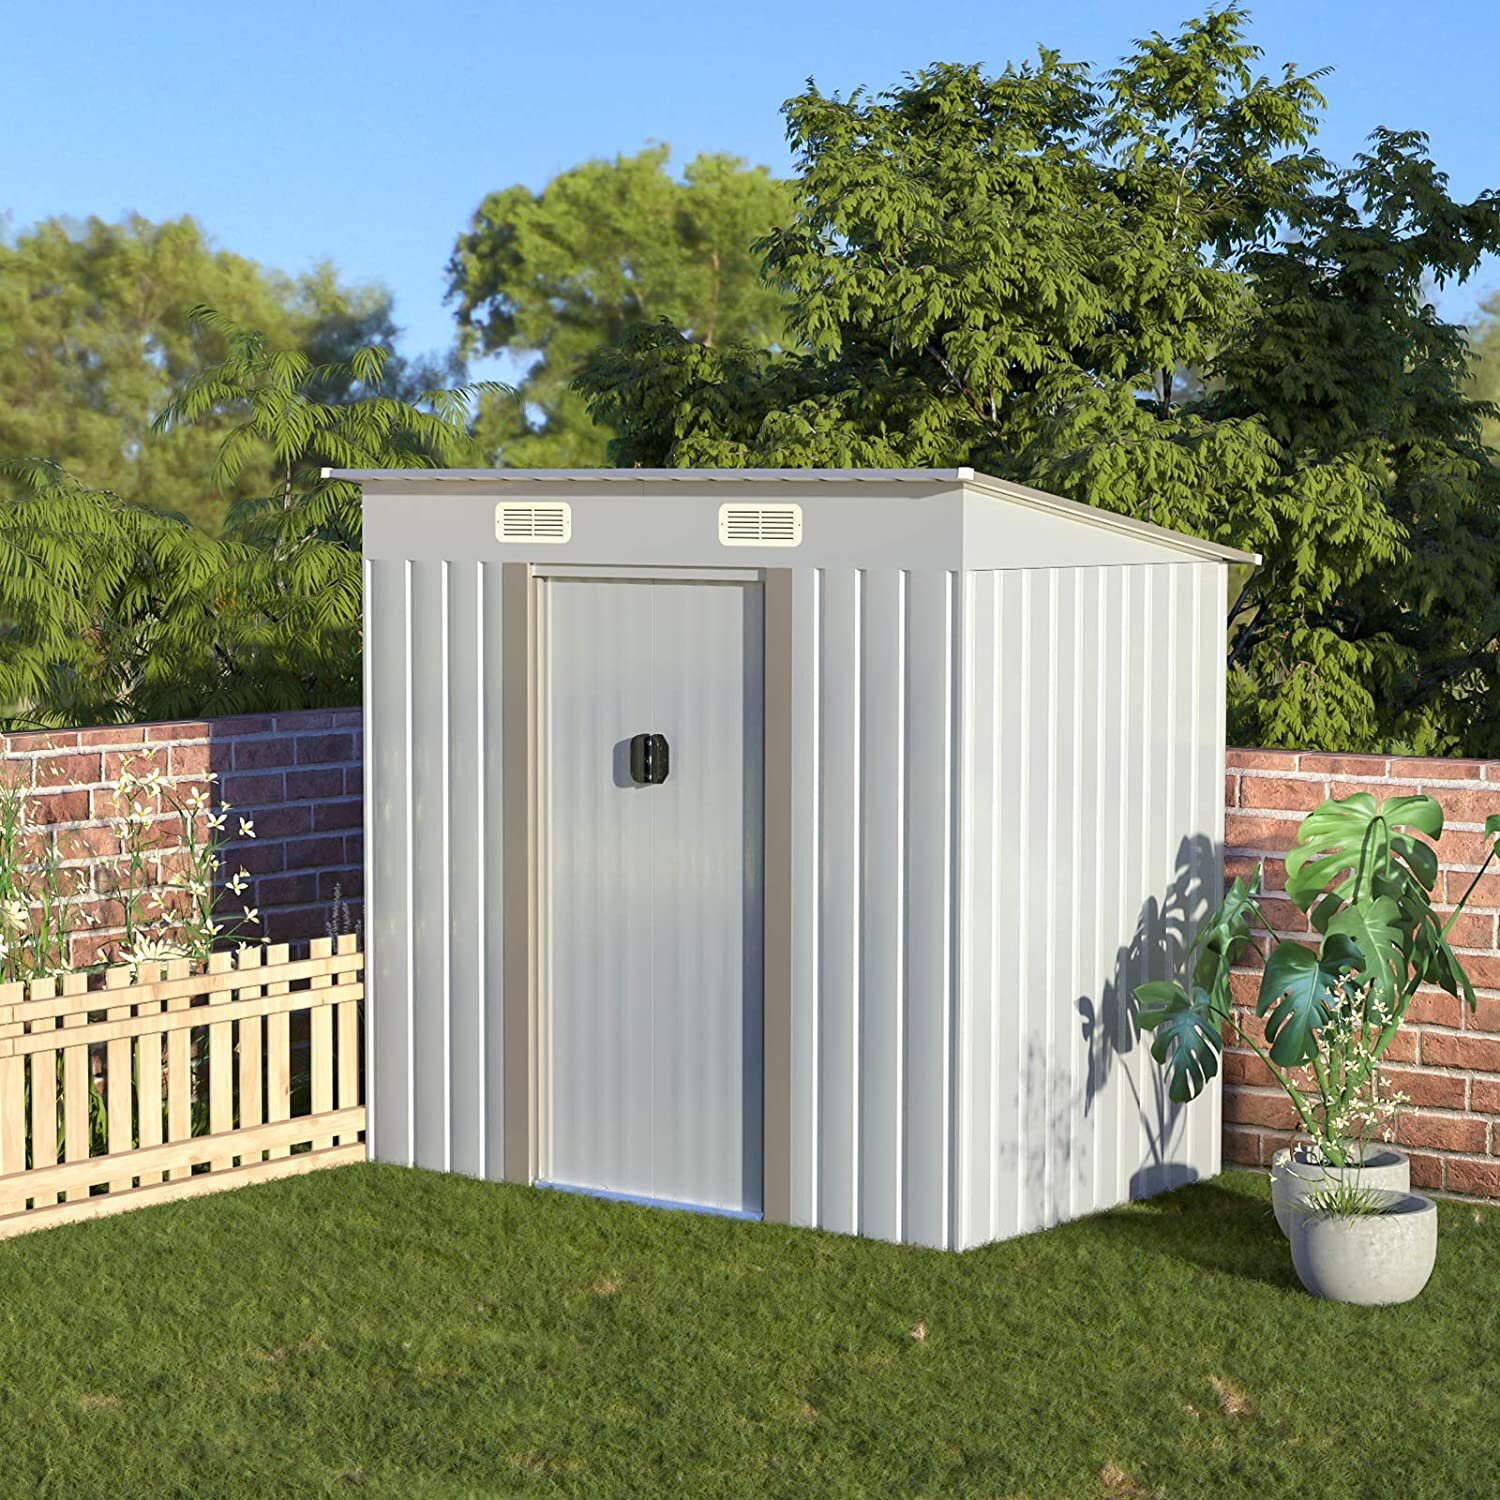 Crownland Backyard Garden Storage Shed 4 x 6 Feet Tool House with Sliding Door Outdoor Lawn Steel Roof Style Sheds Gray 